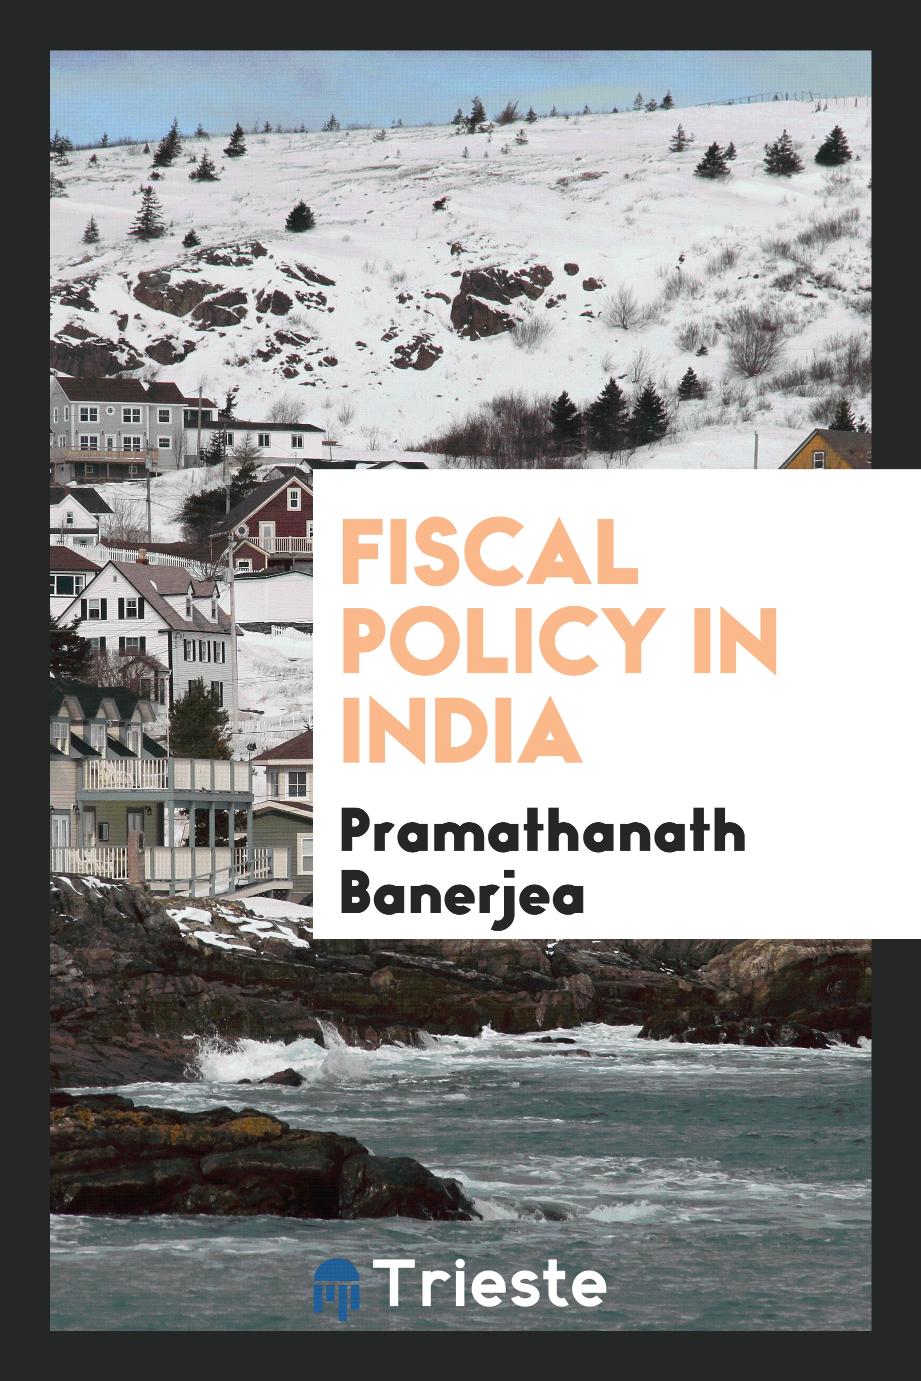 Fiscal policy in India